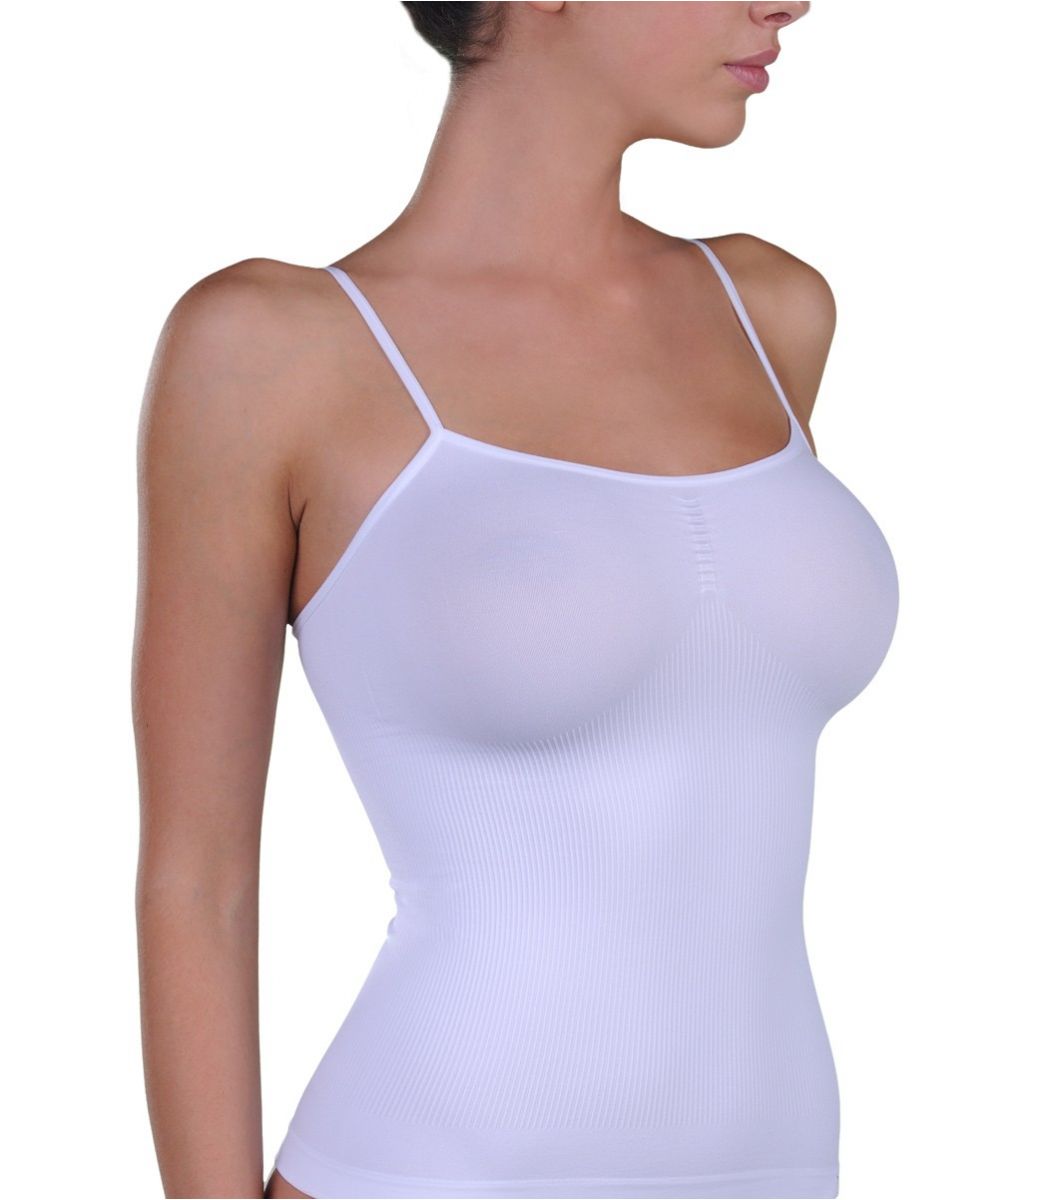  Camisole Lord Camisole, seamless 6207-3